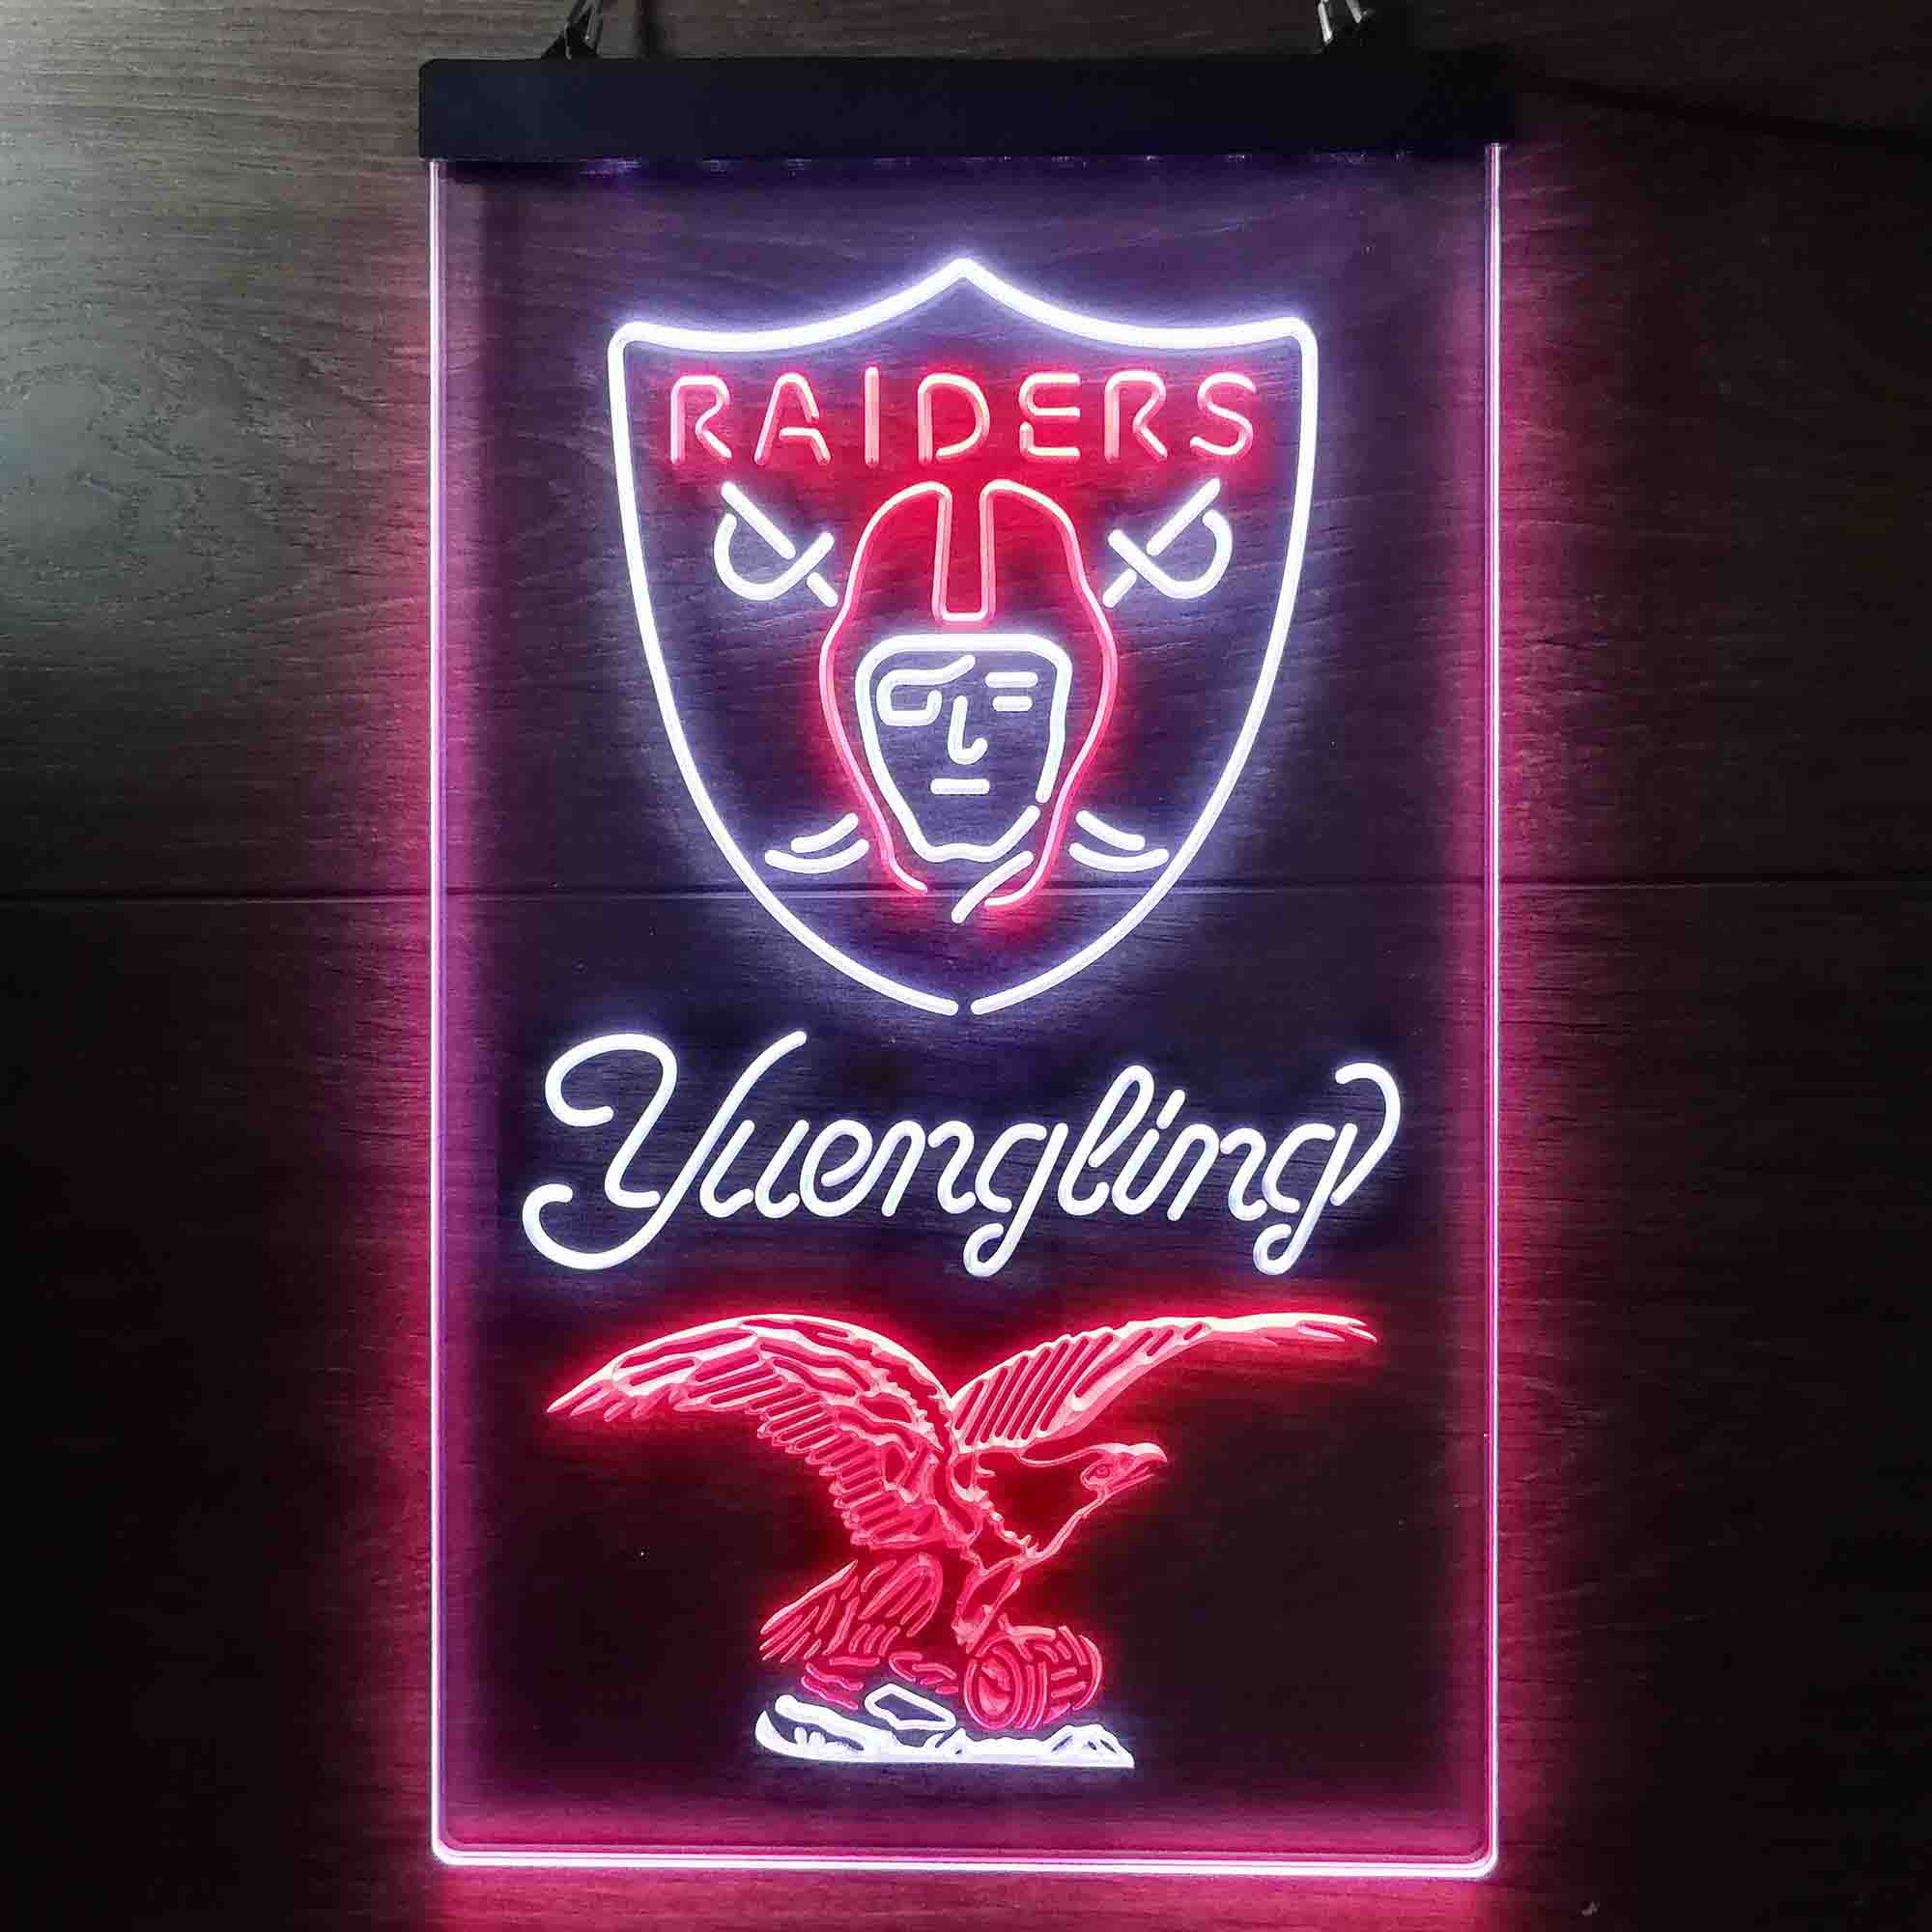 Yuengling Bar Oakland Raiders Est. 1960 LED Neon Sign